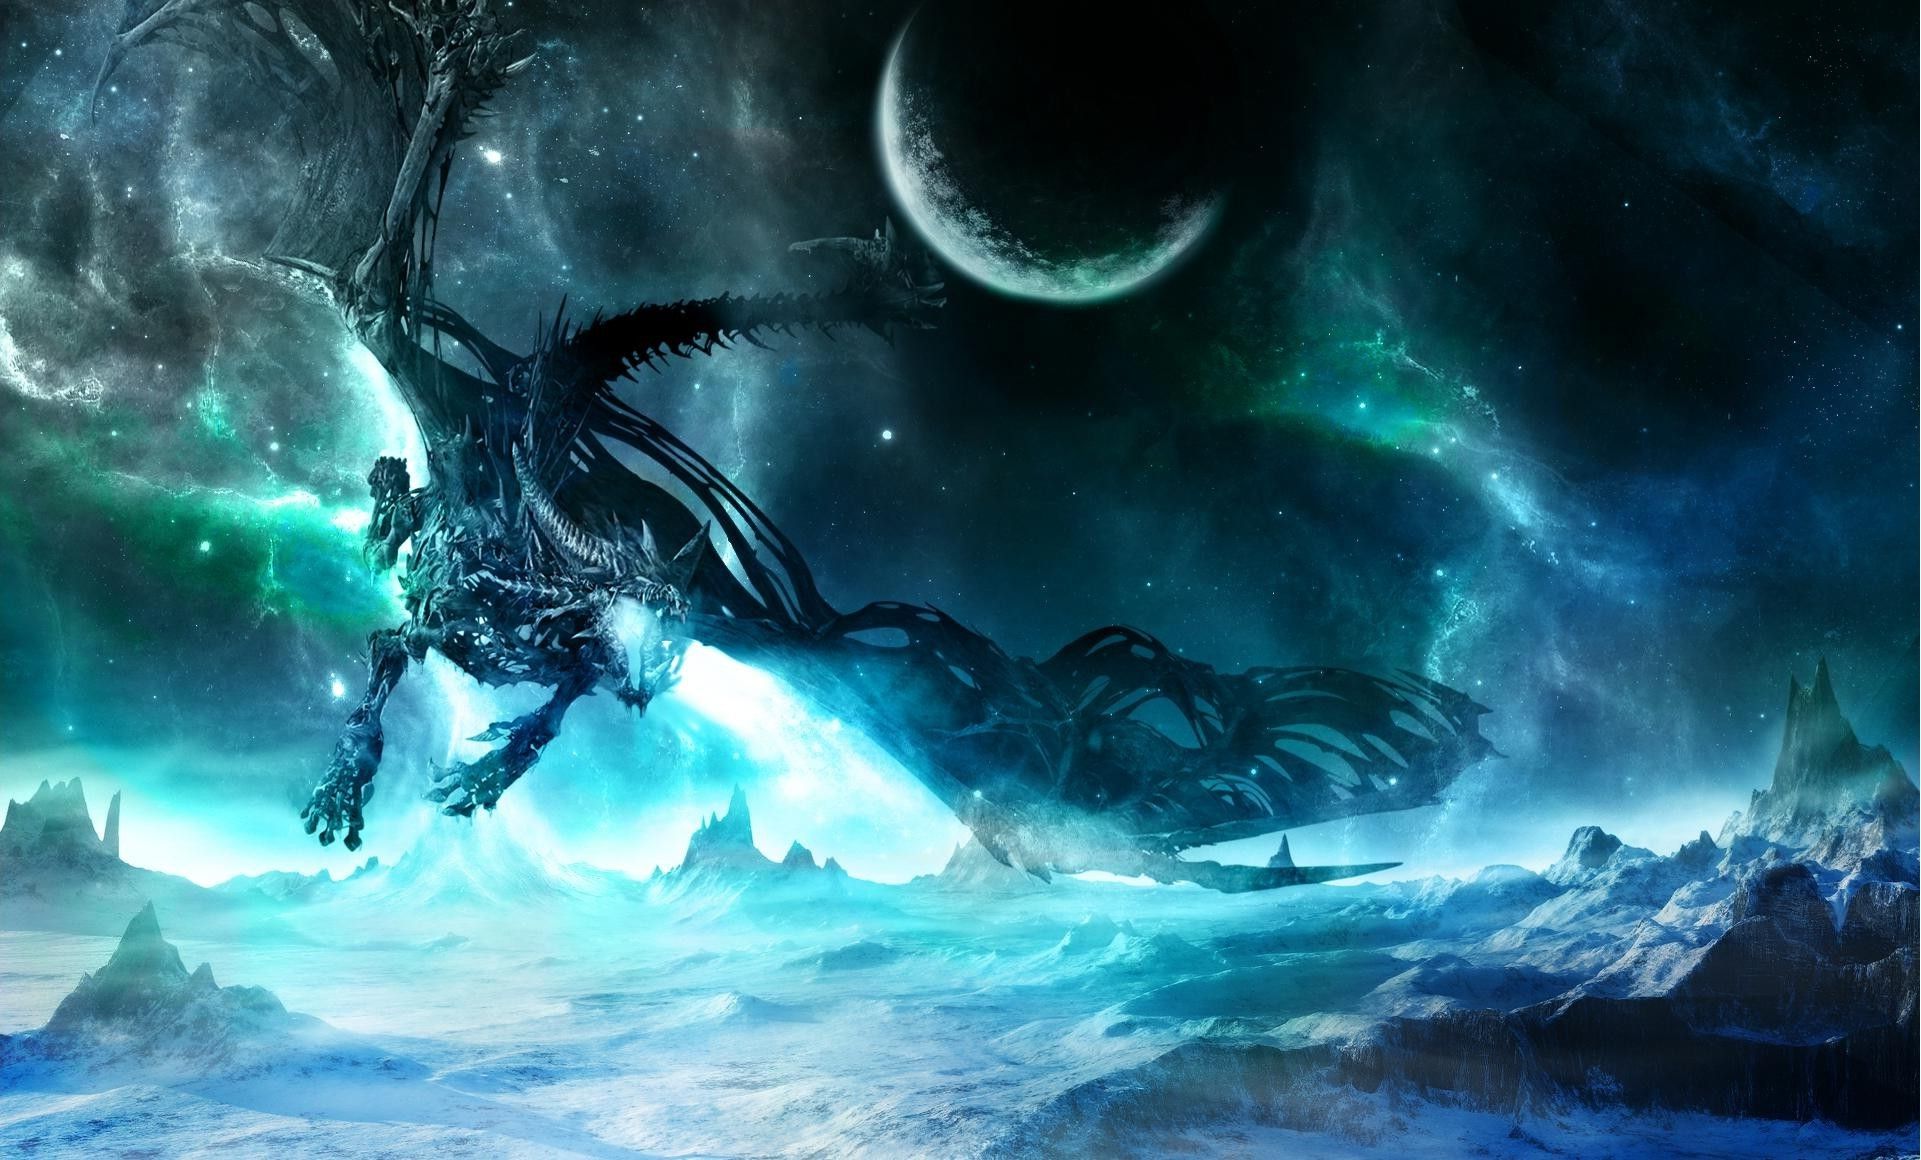 Black And Blue Dragon Wallpapers